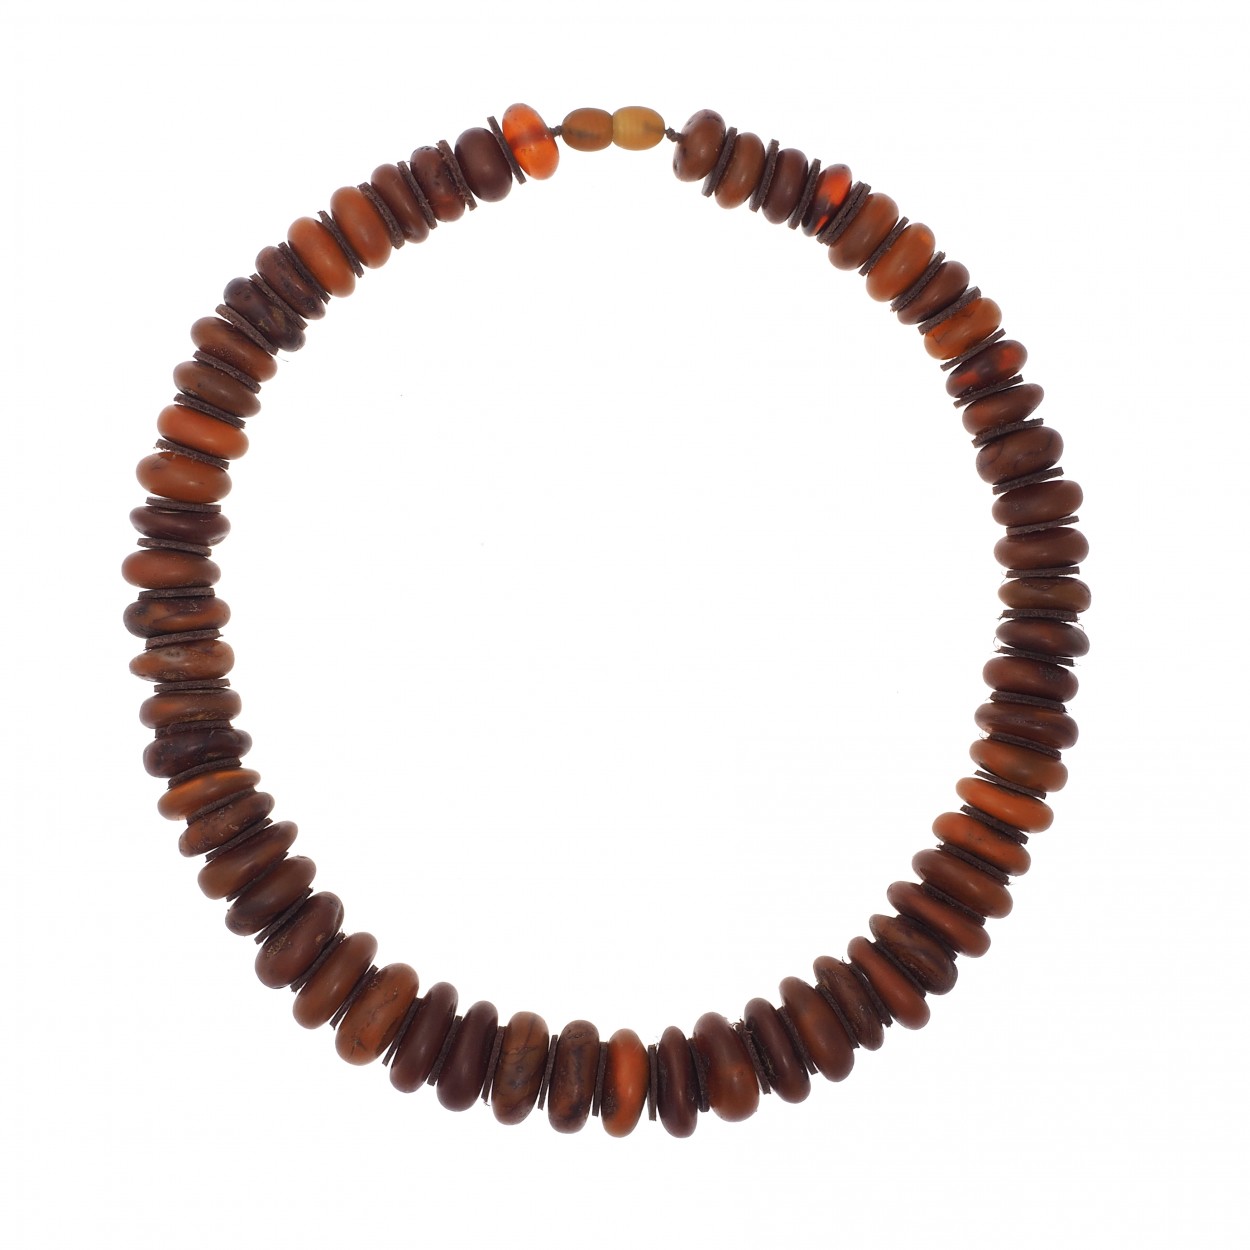  Military Amber Necklace